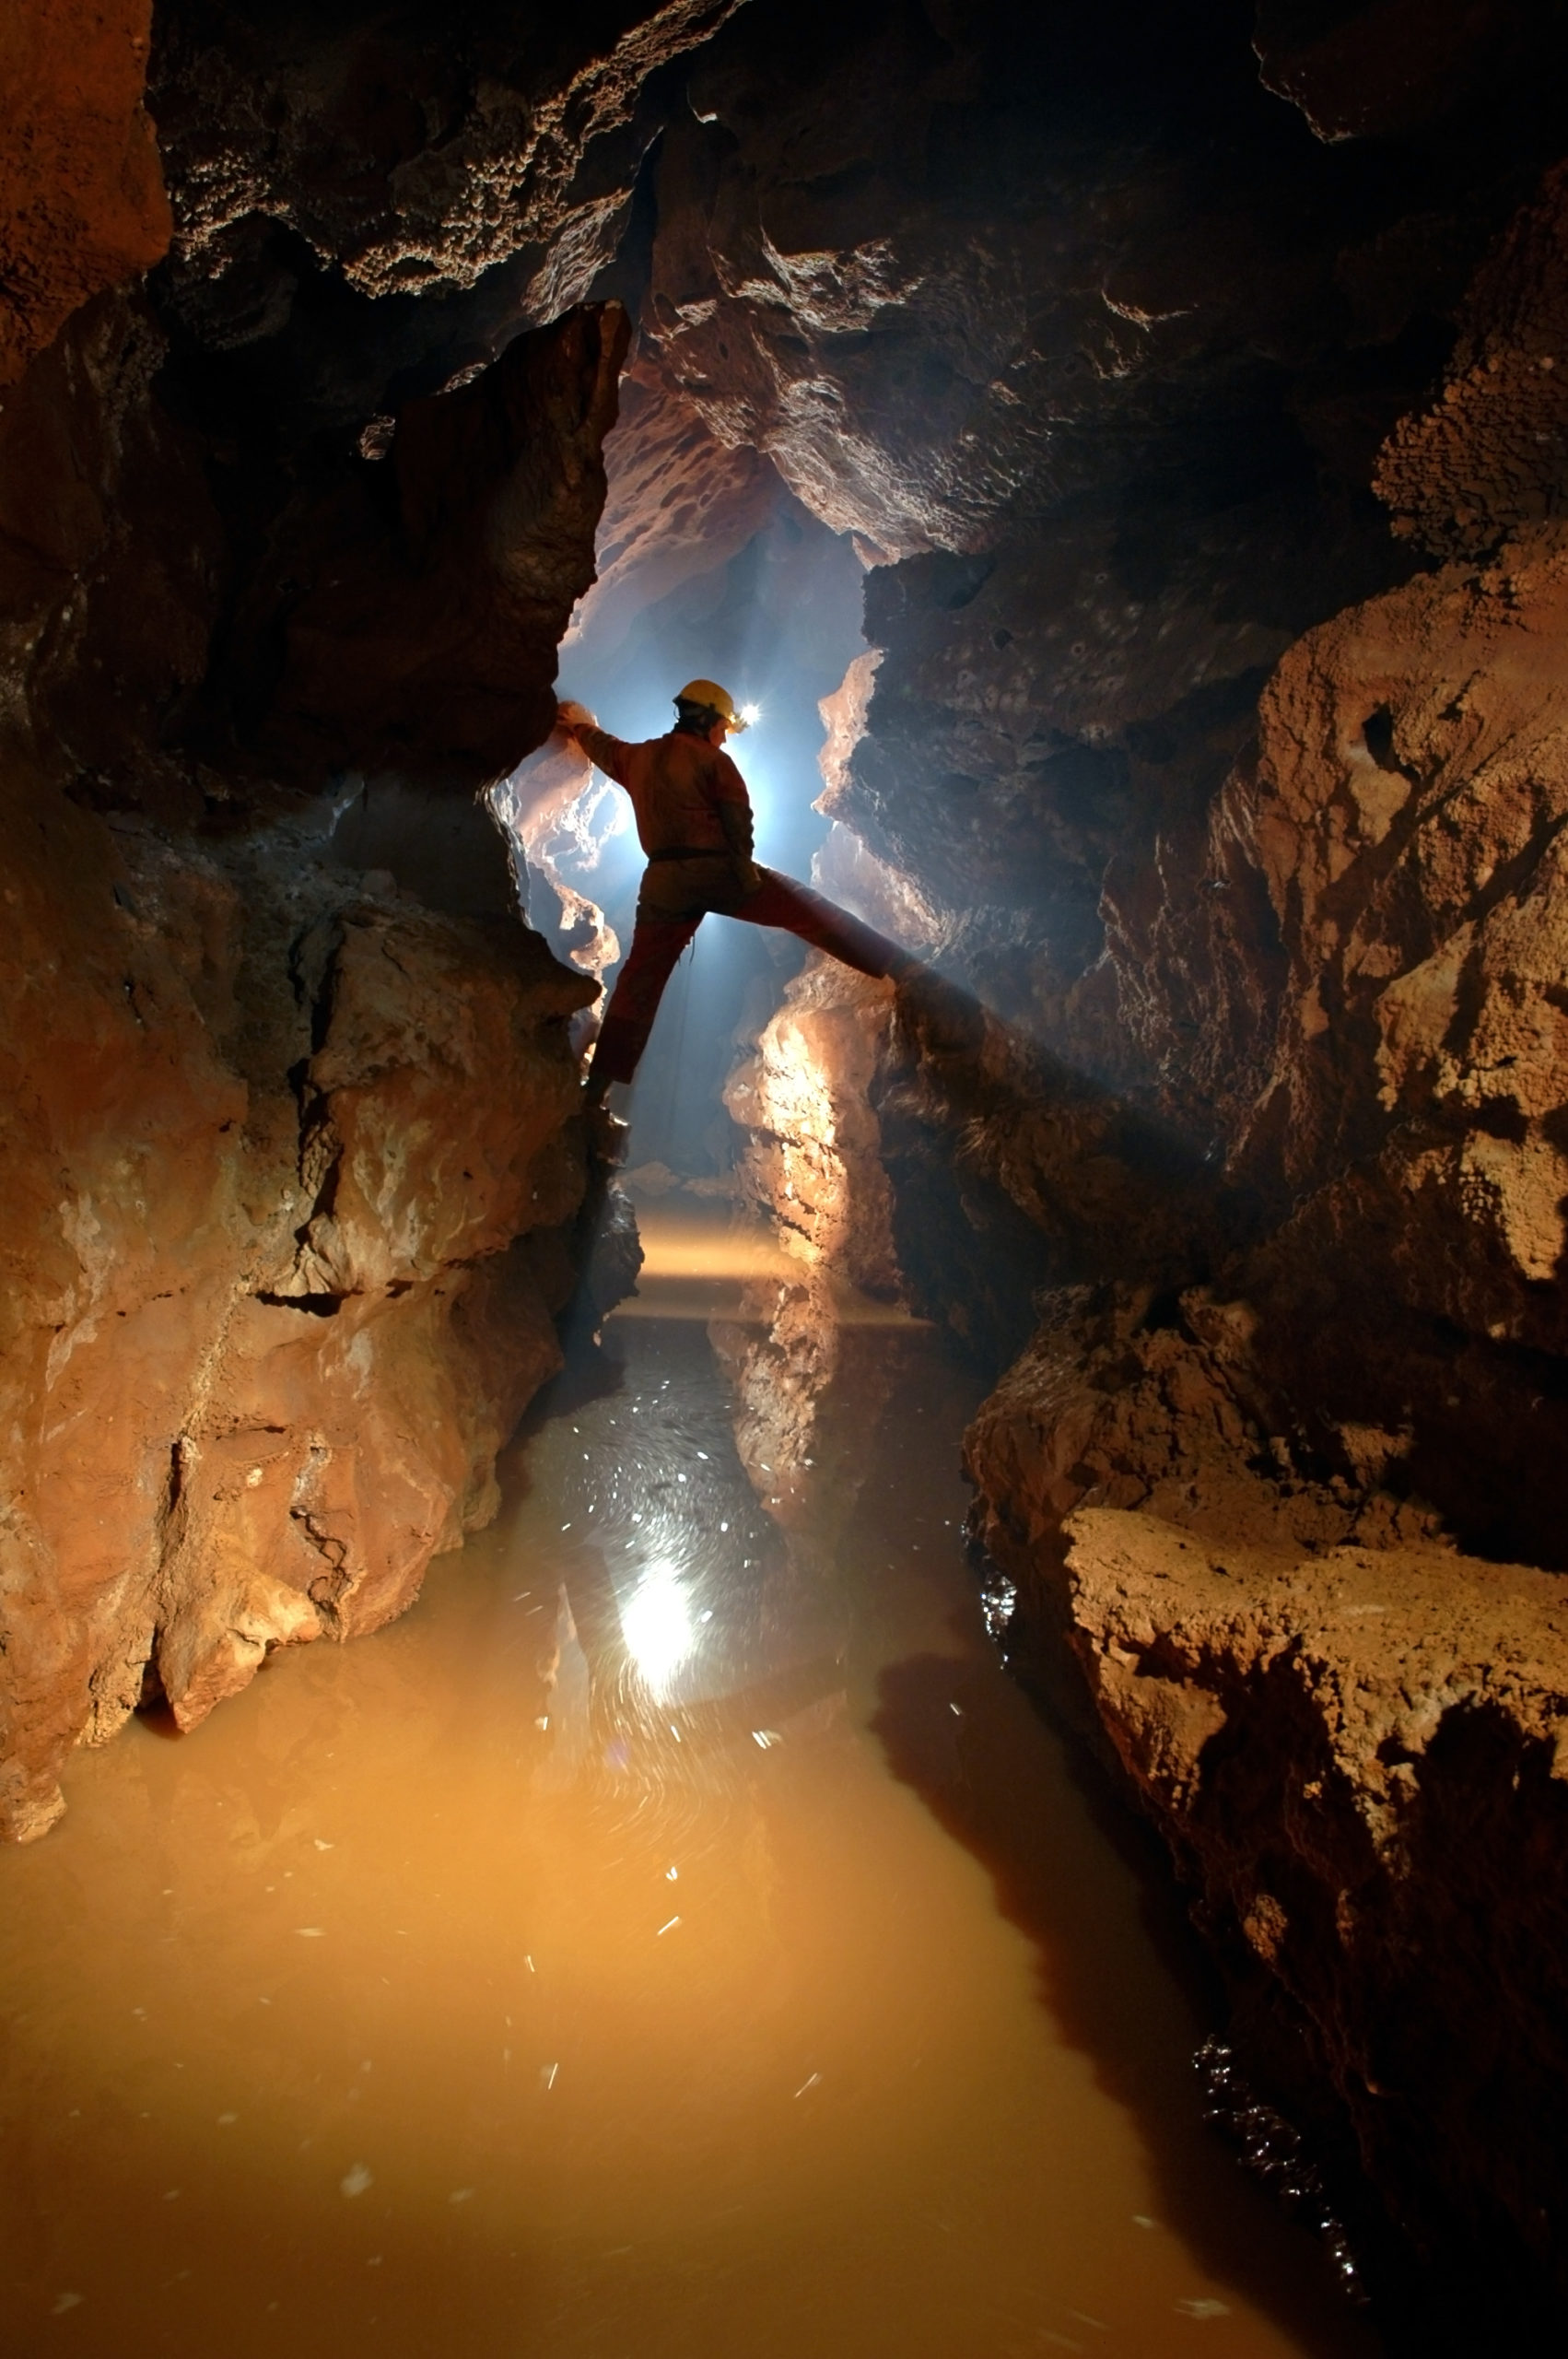 Silhouette of a cave explorer in the underground exploring a cave